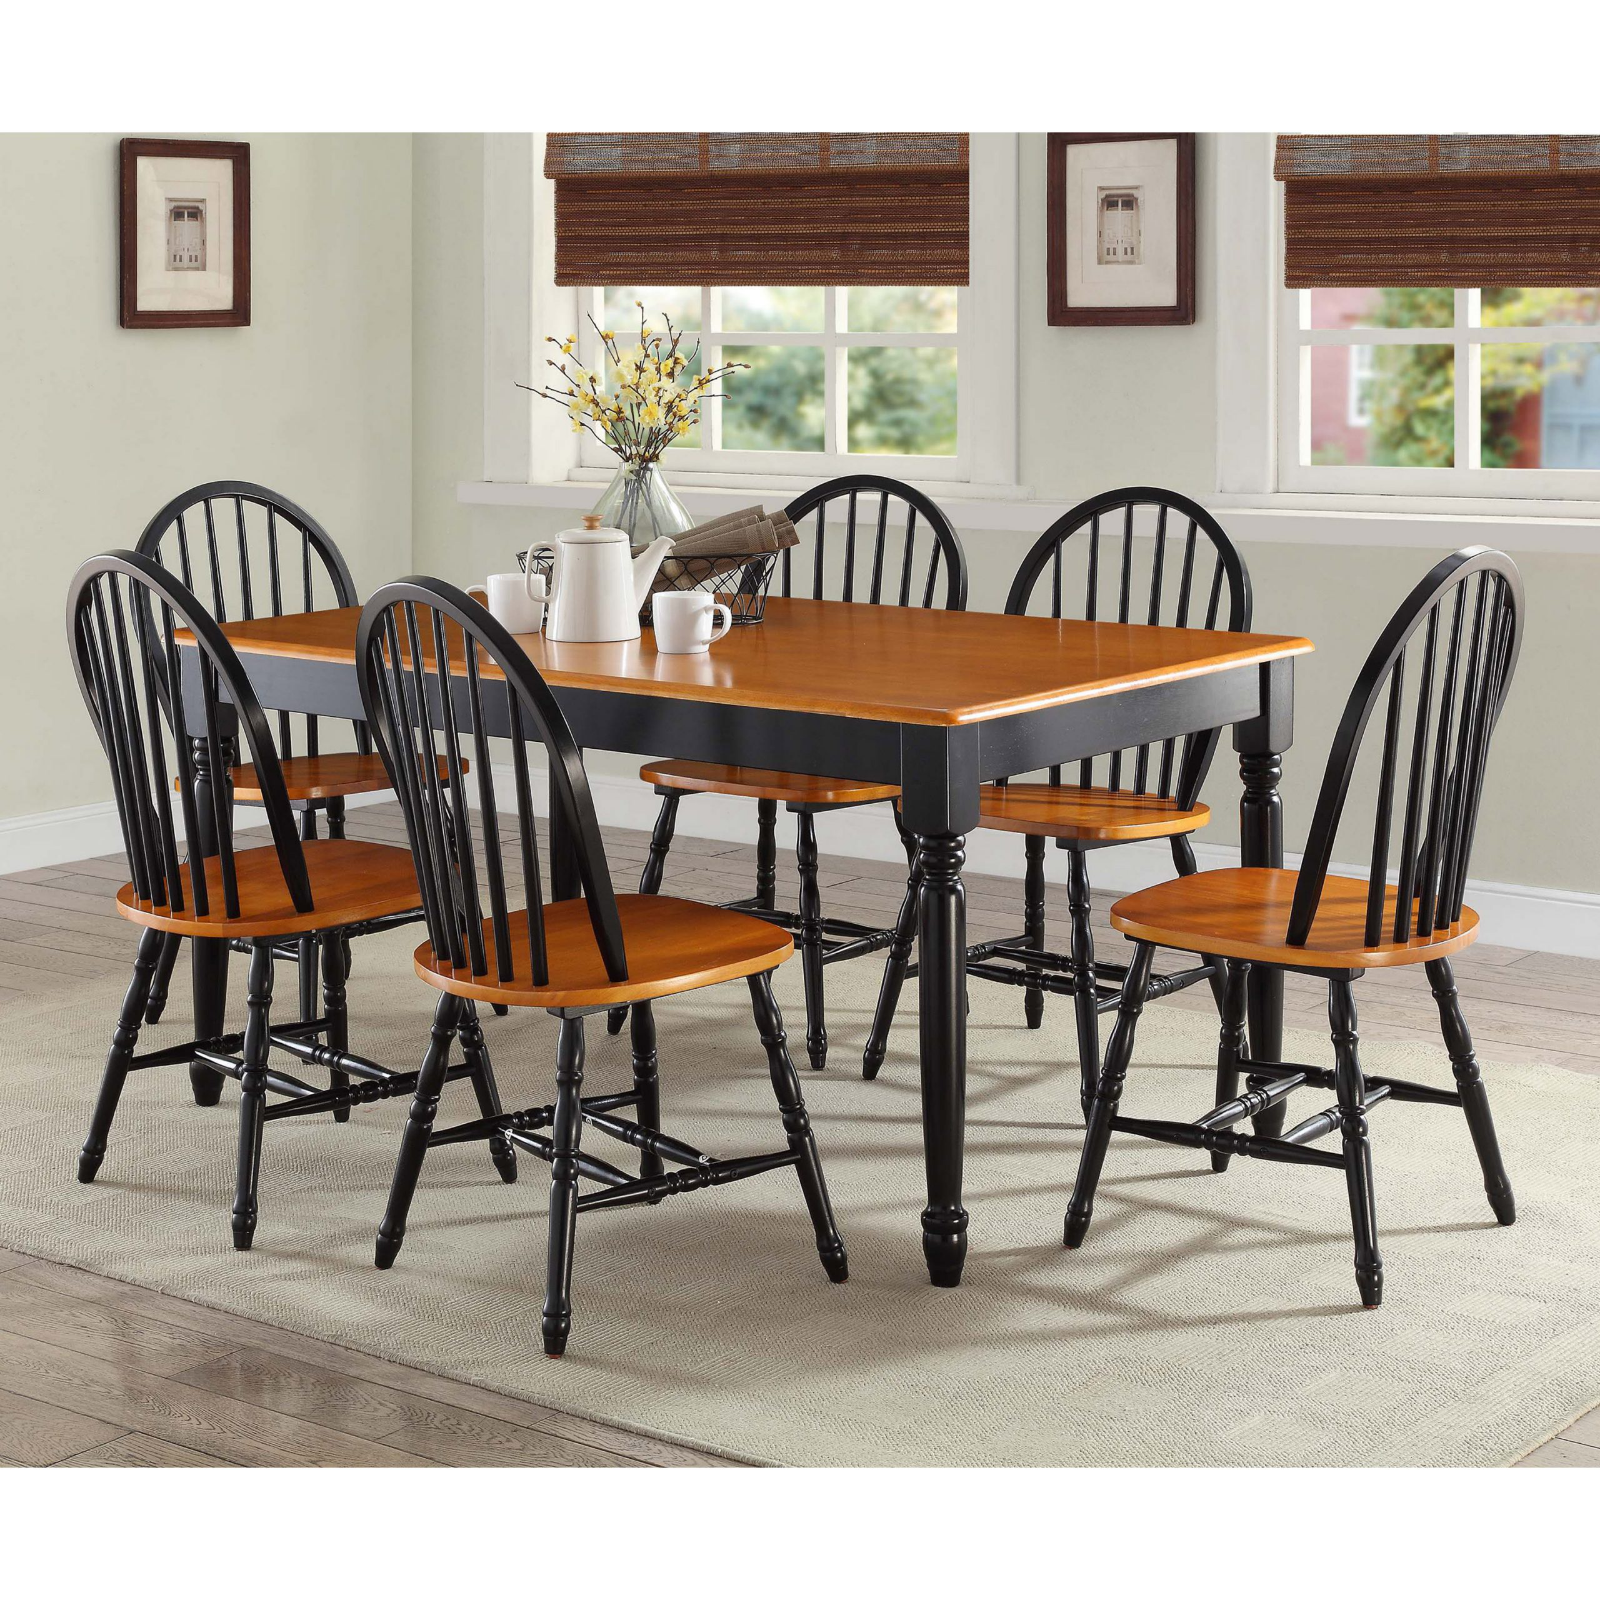 Farmhouse Country Wood Kitchen Tables And Chairs 7 Piece